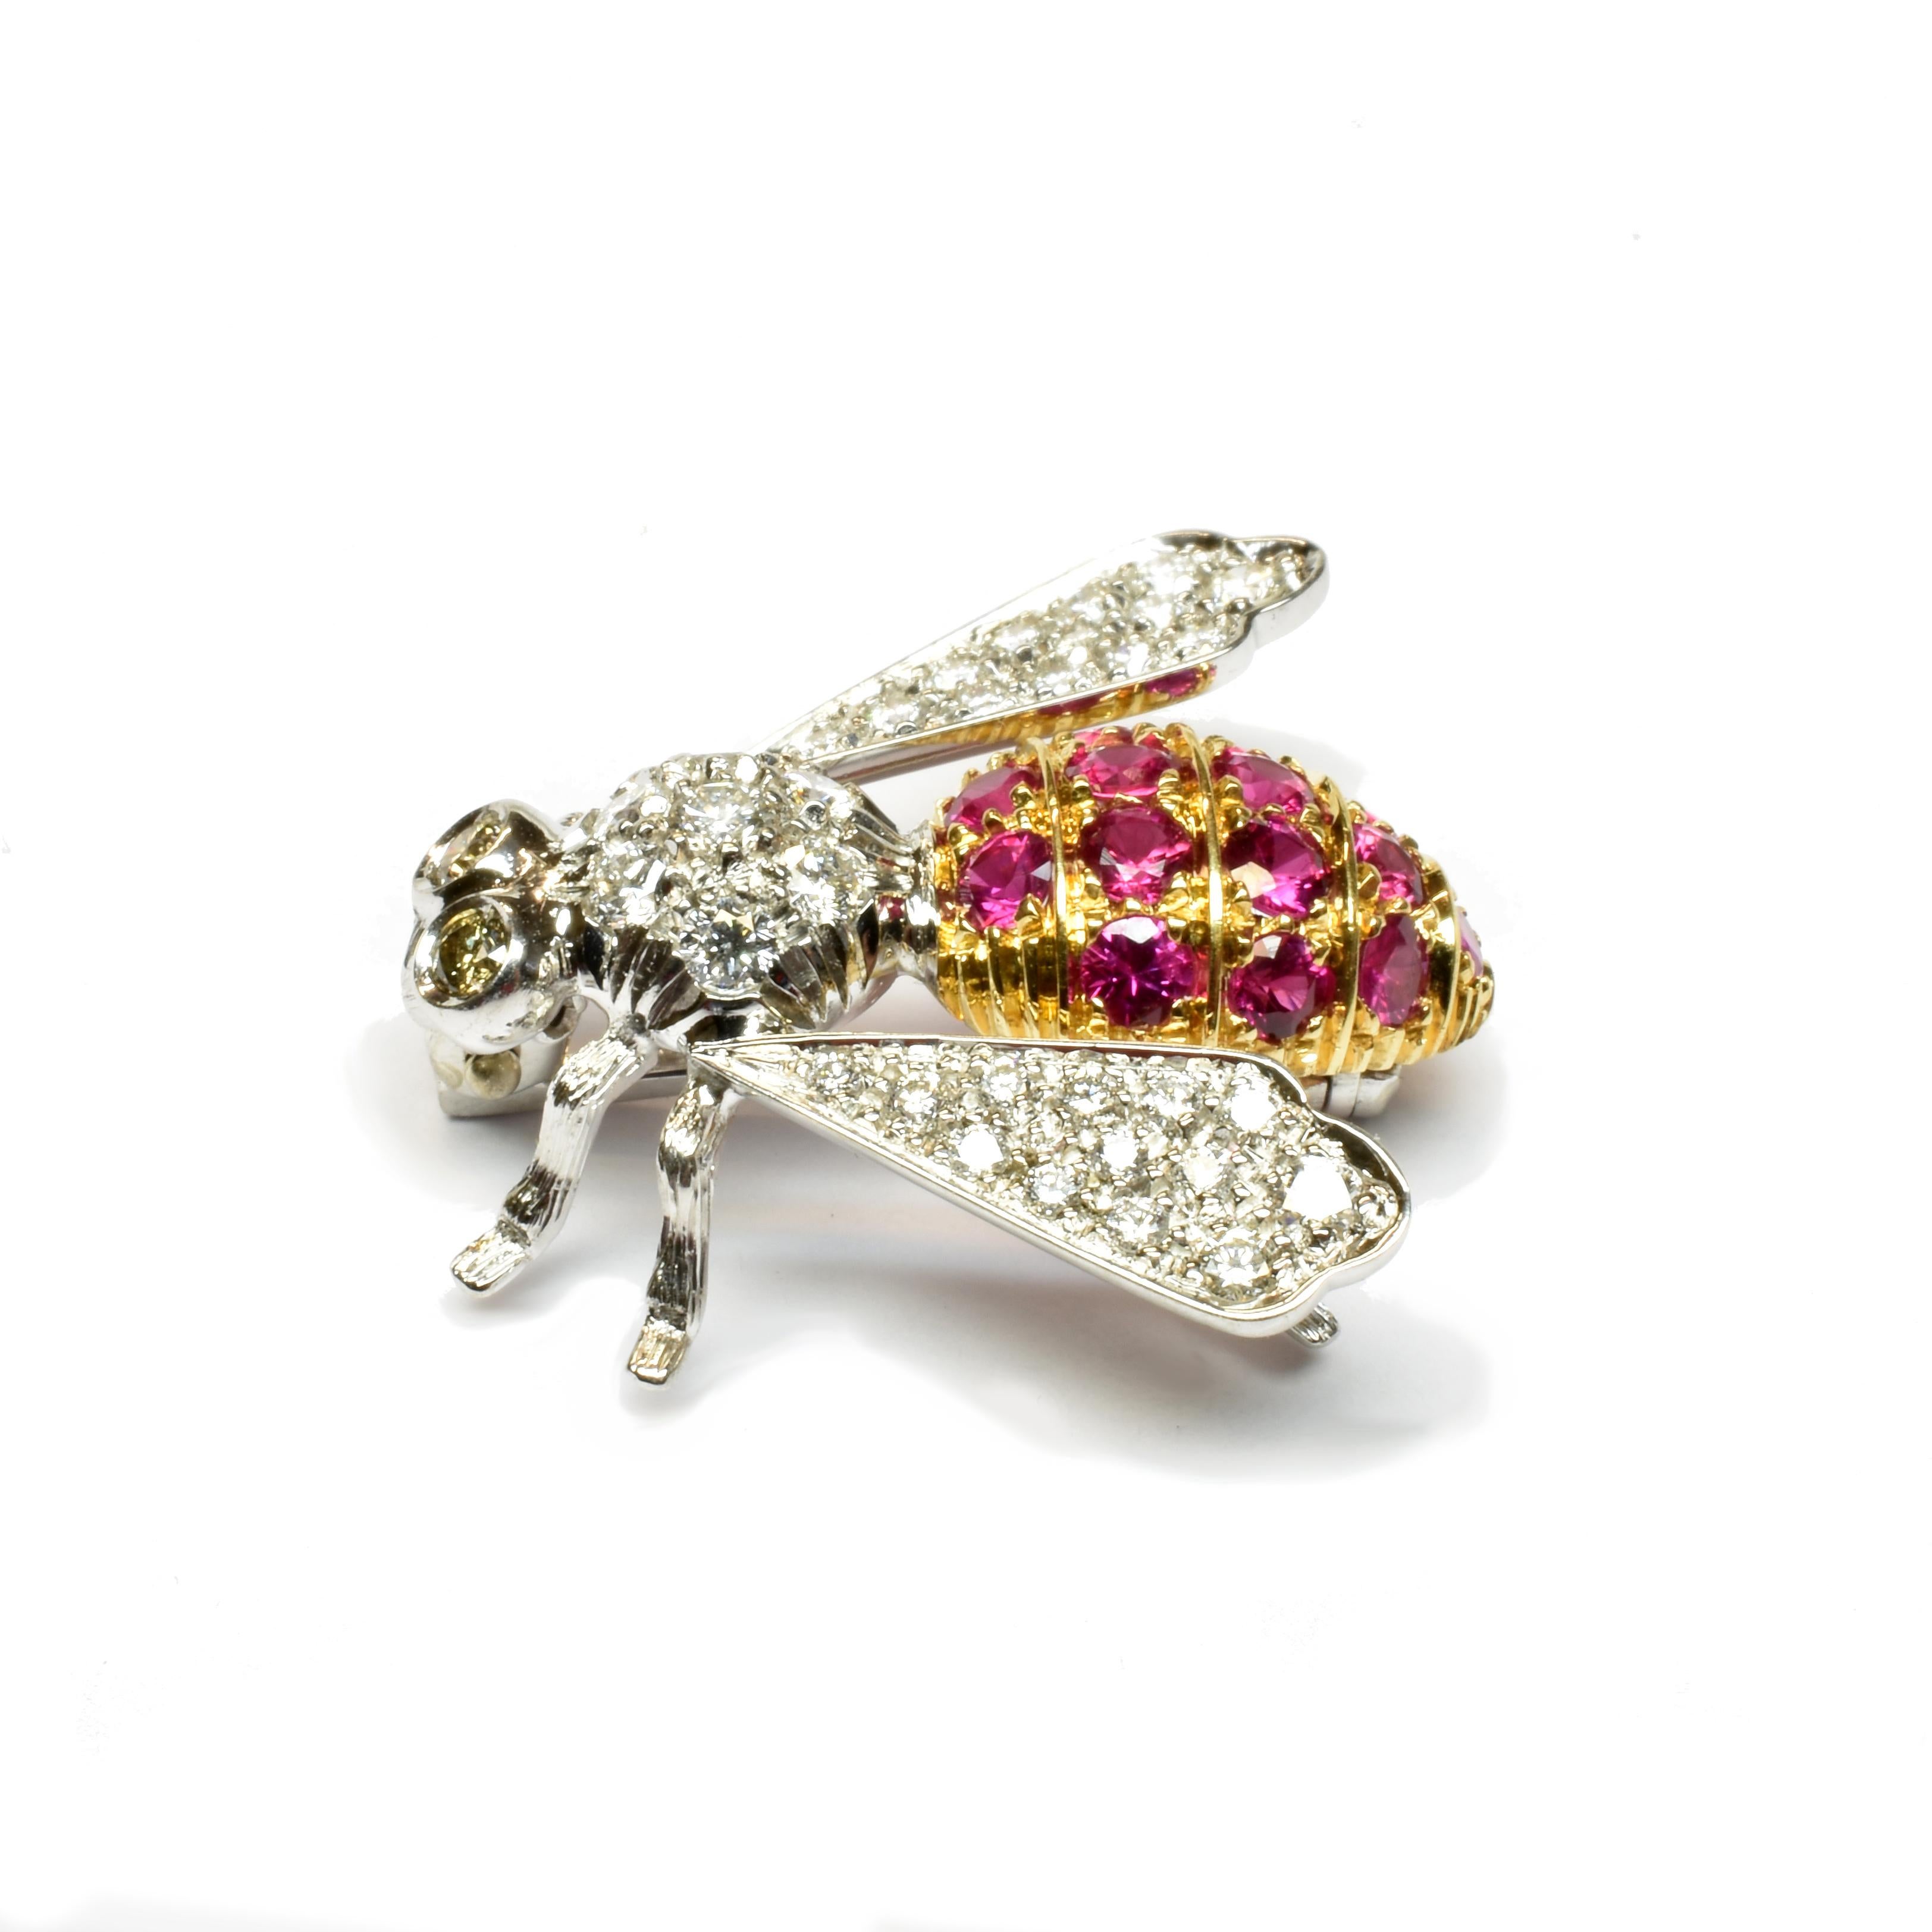 Contemporary Diamonds and Rubies Gold Bee Brooch Made in Italy